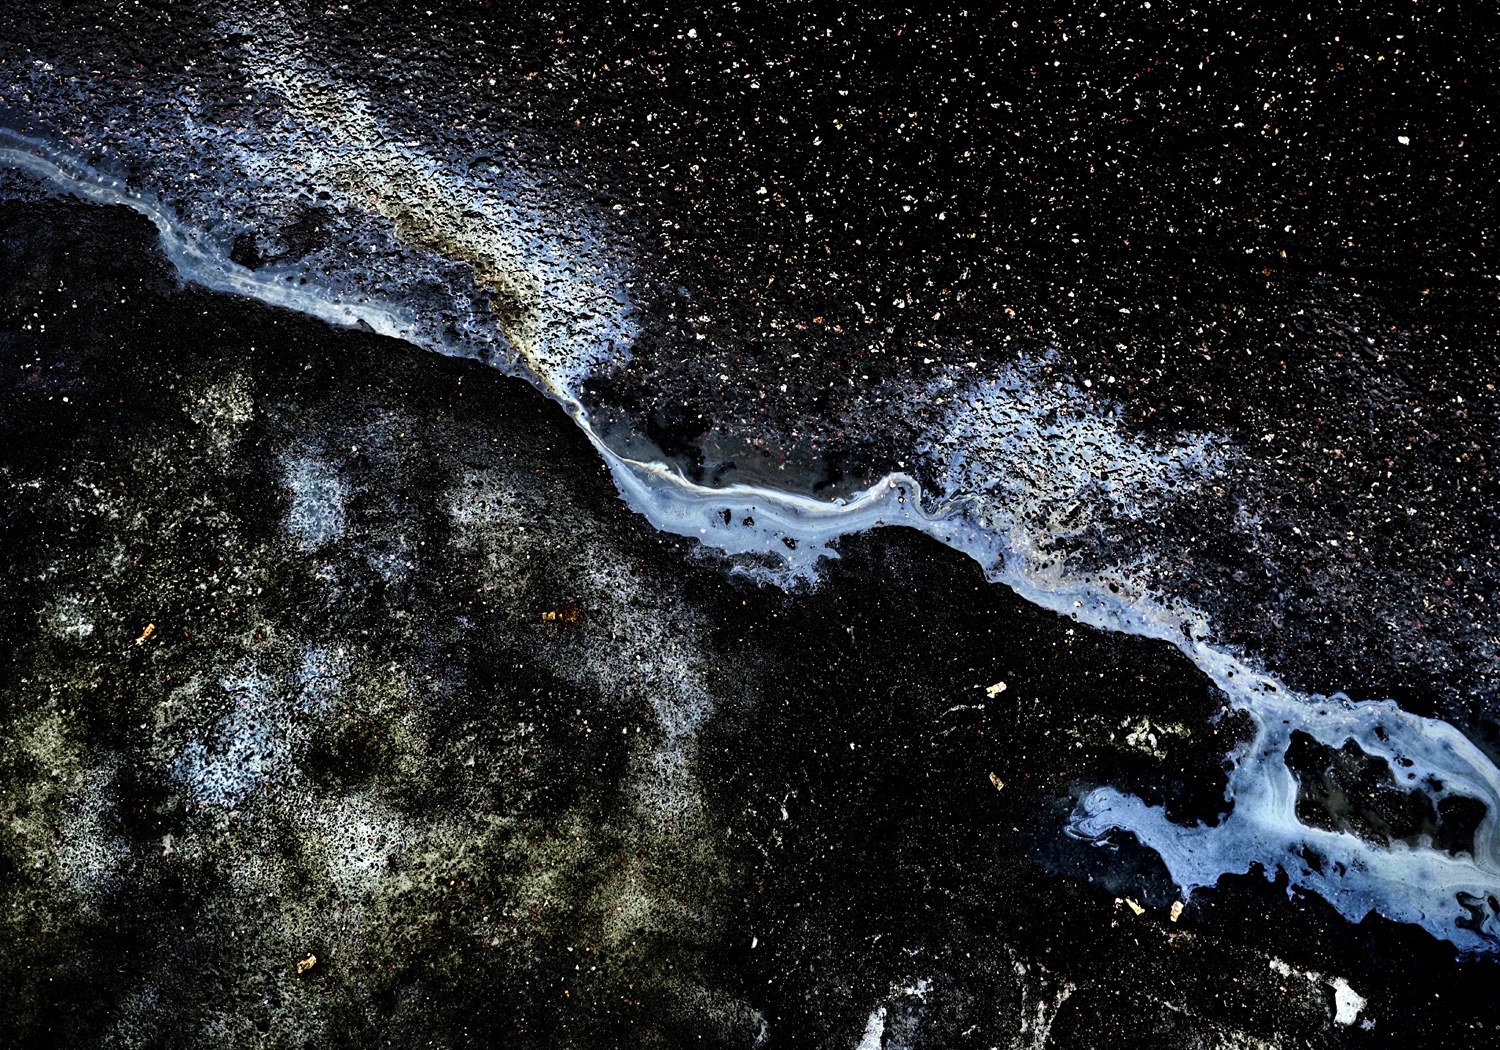 A photograph of Juha Tanhua's oil paintings which look like cosmic scenes from a telescope